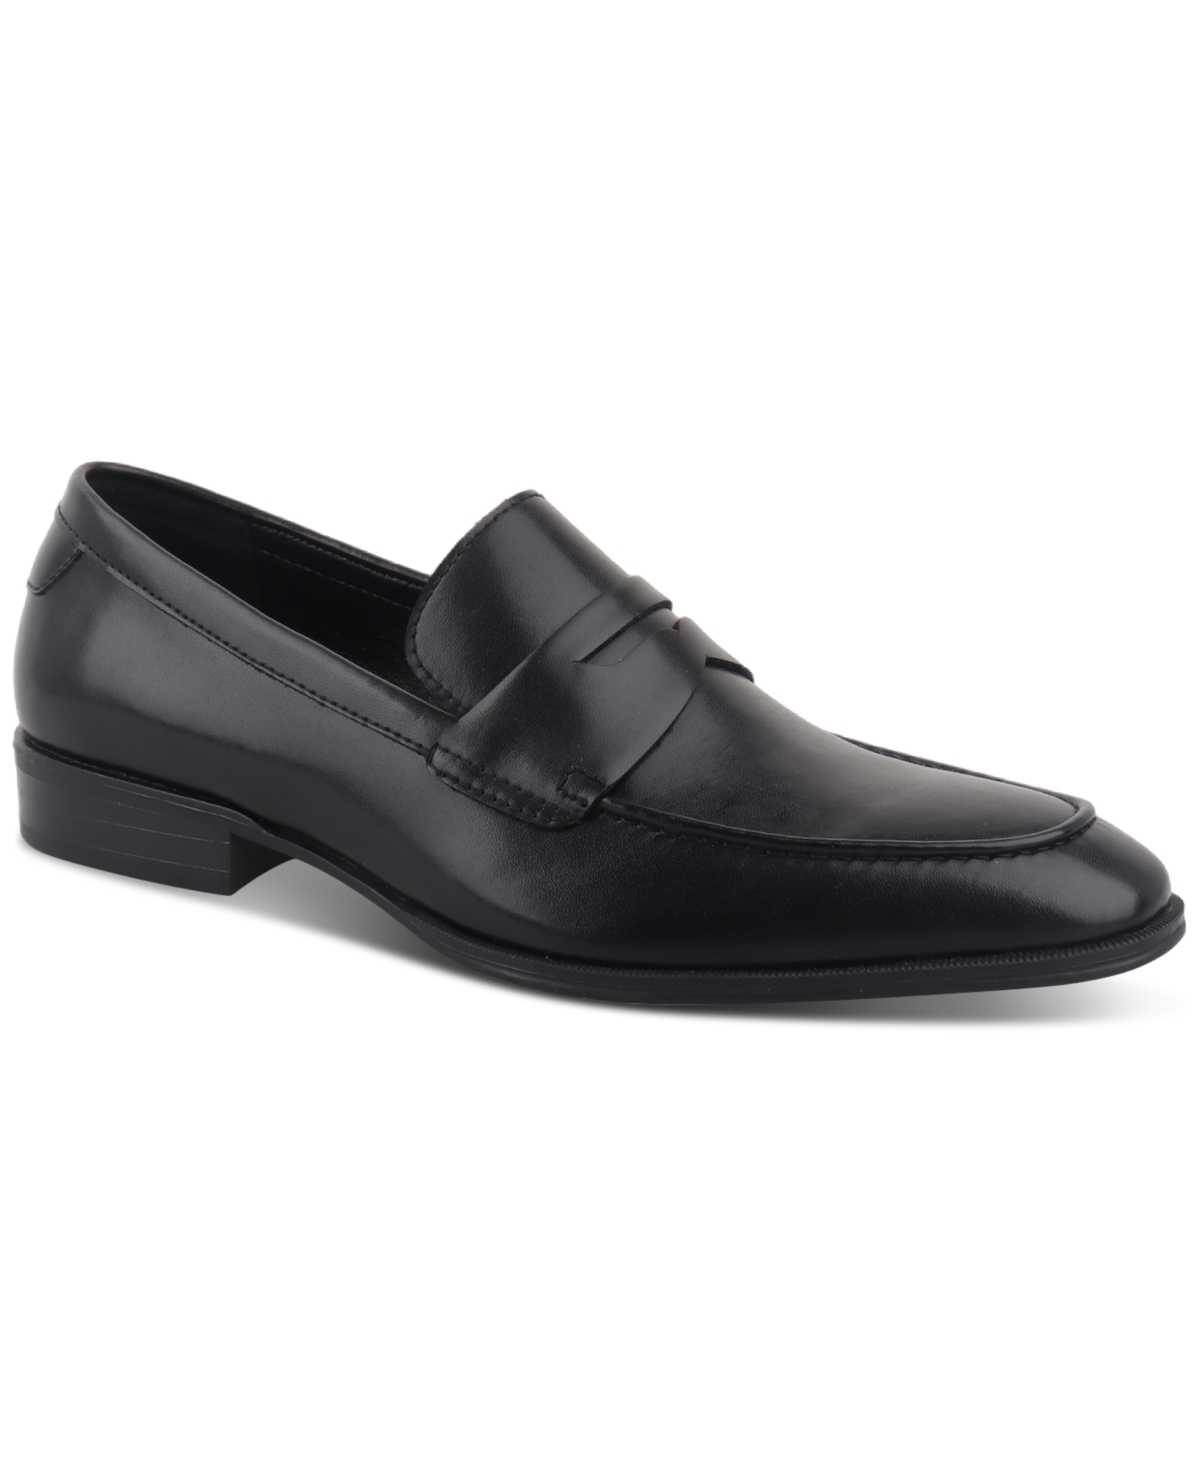 Men's Penny Slip-On Penny Loafers, Created for Macy's - Black